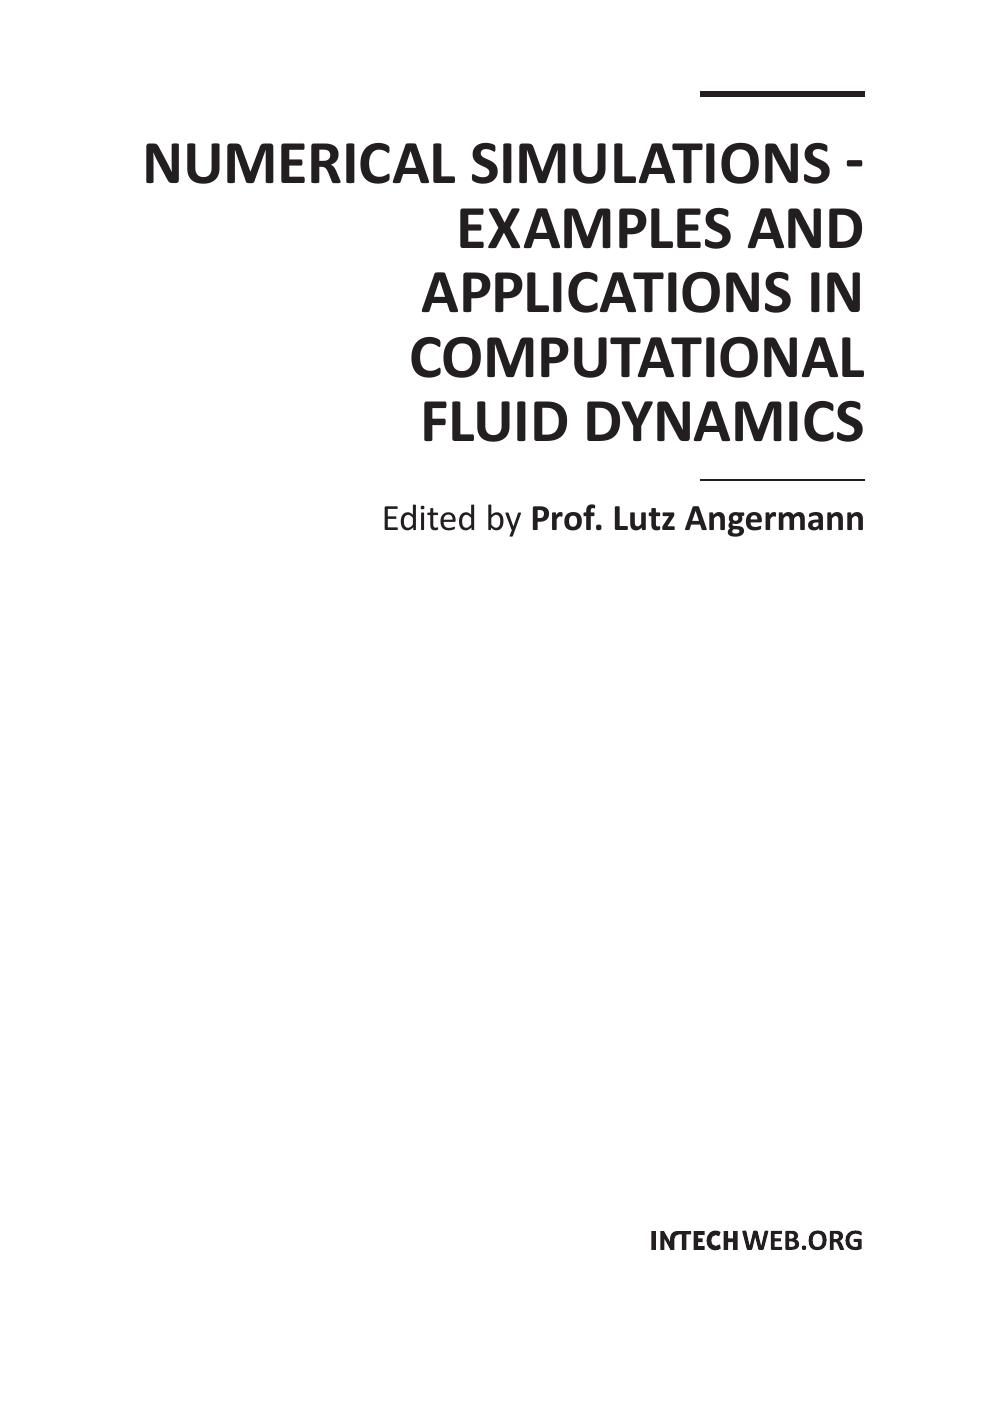 Numerical Simulations - Examples and Applications in Computational Fluid Dynamics.indd